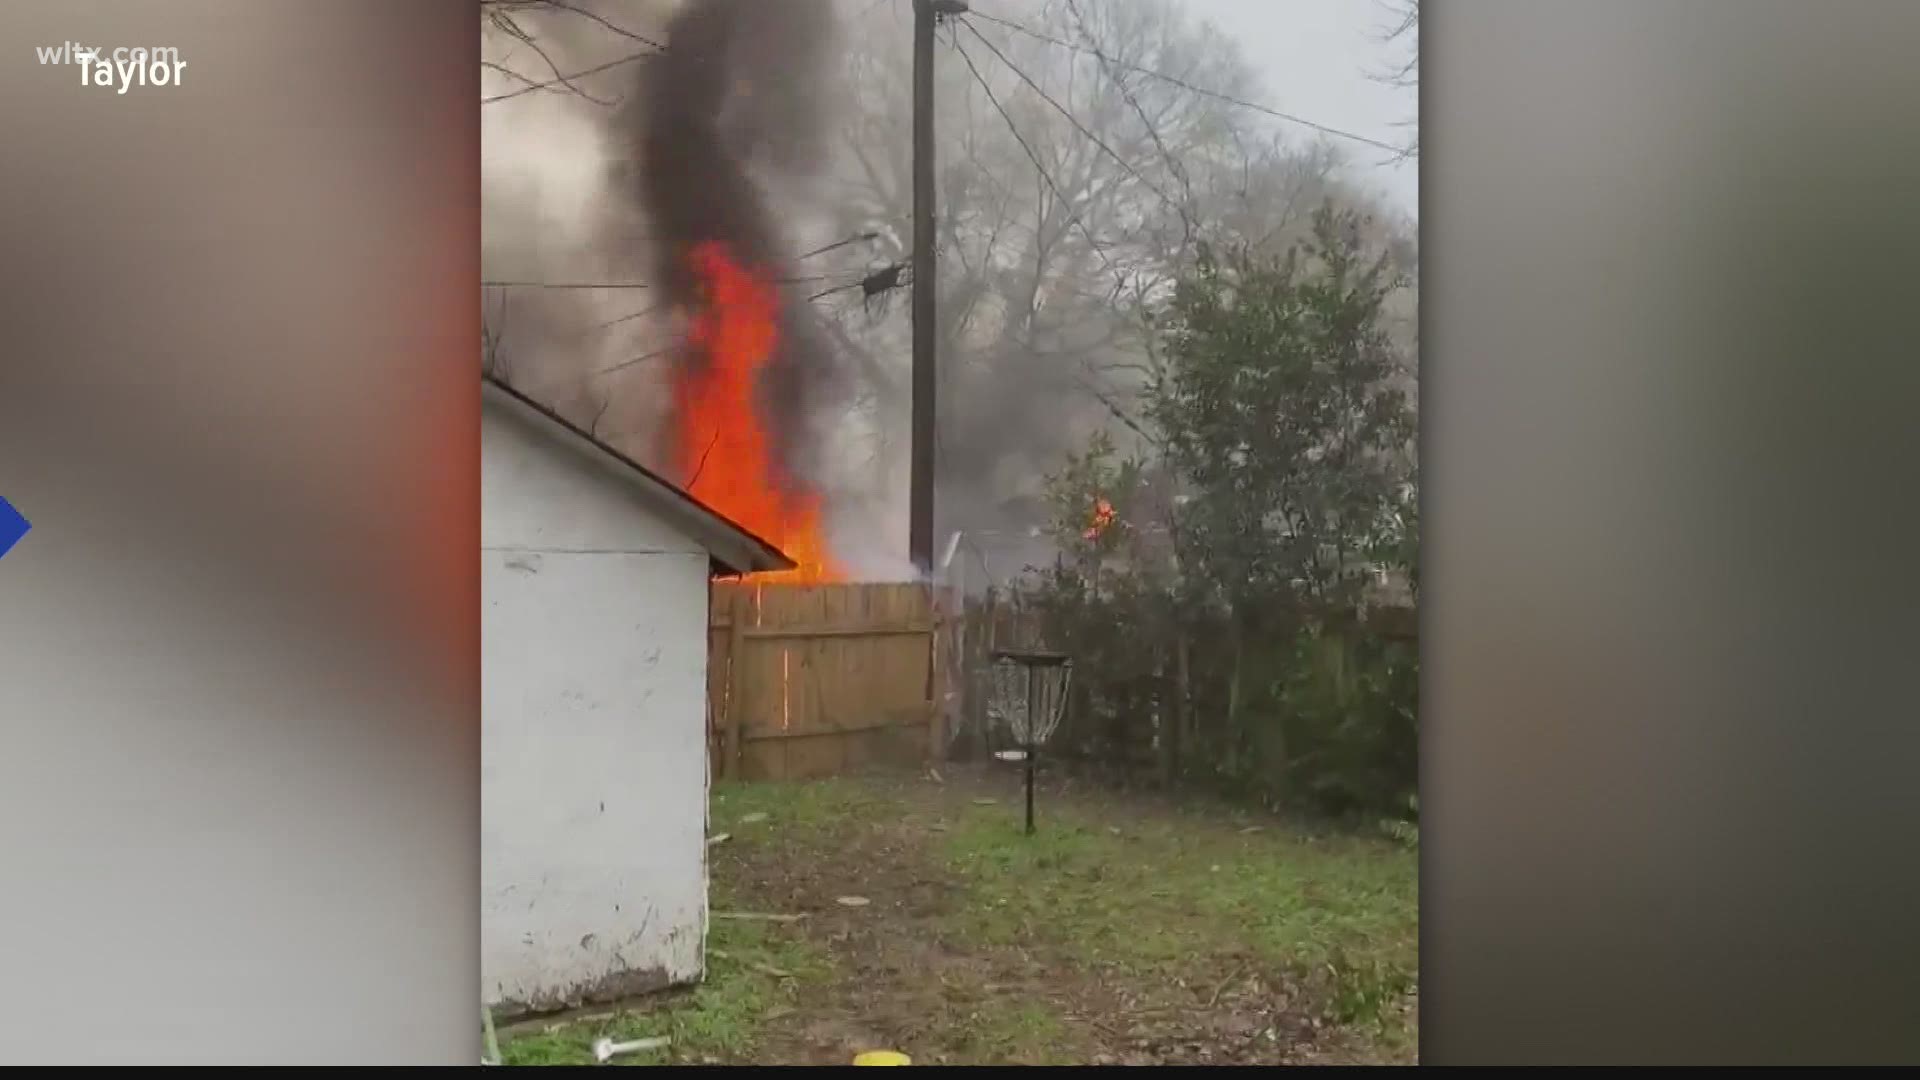 The small plane crashed and appeared to have struck part of a home before the plane caught fire.